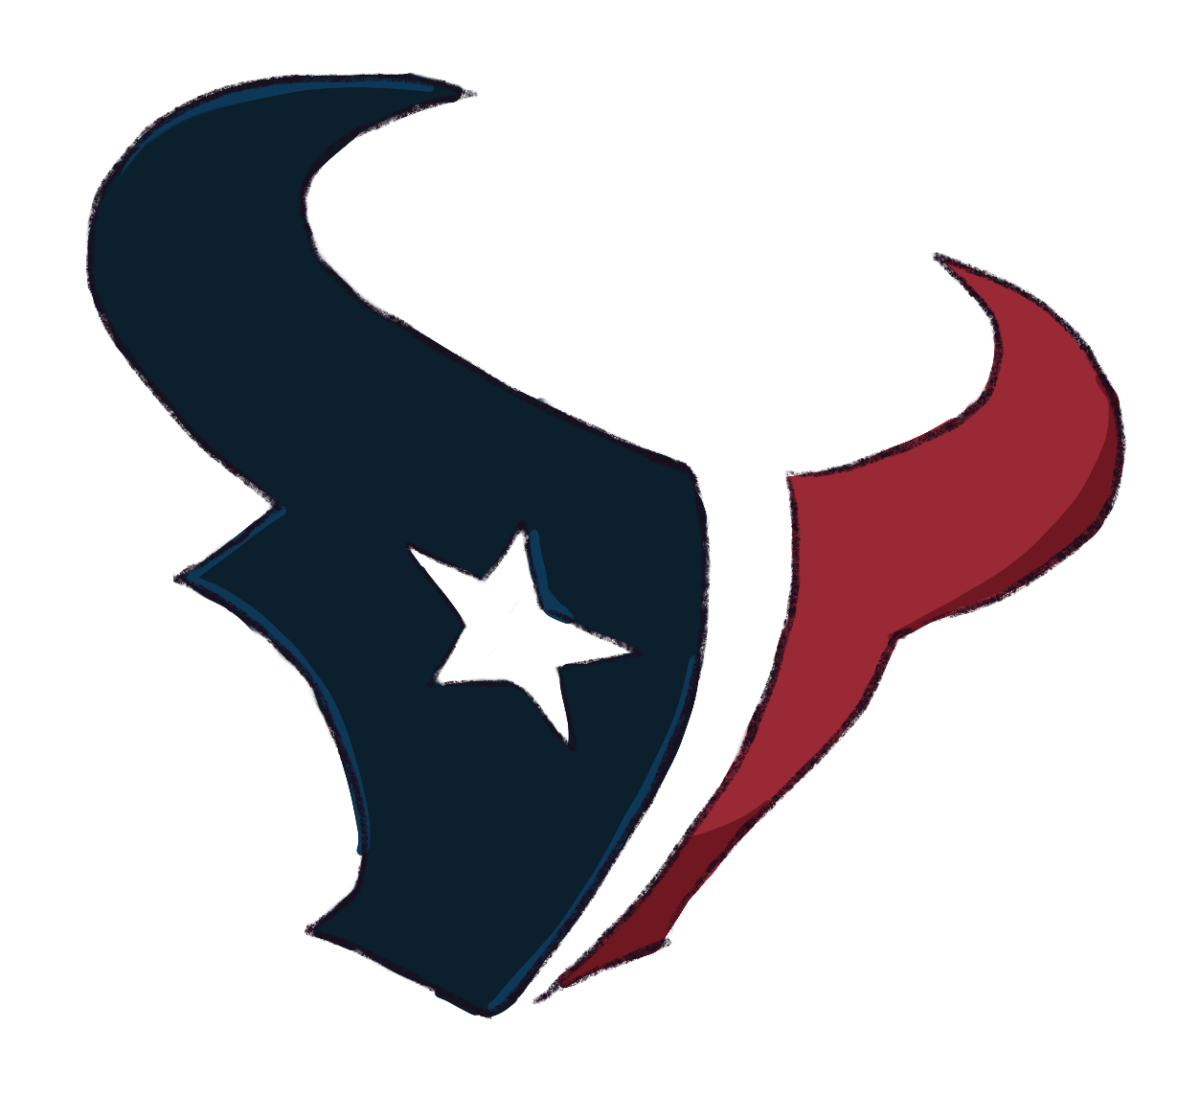 The Texans logo has been a staple of Houston football since 2000. Through both two-win seasons and playoff victories, the logo has not changed.